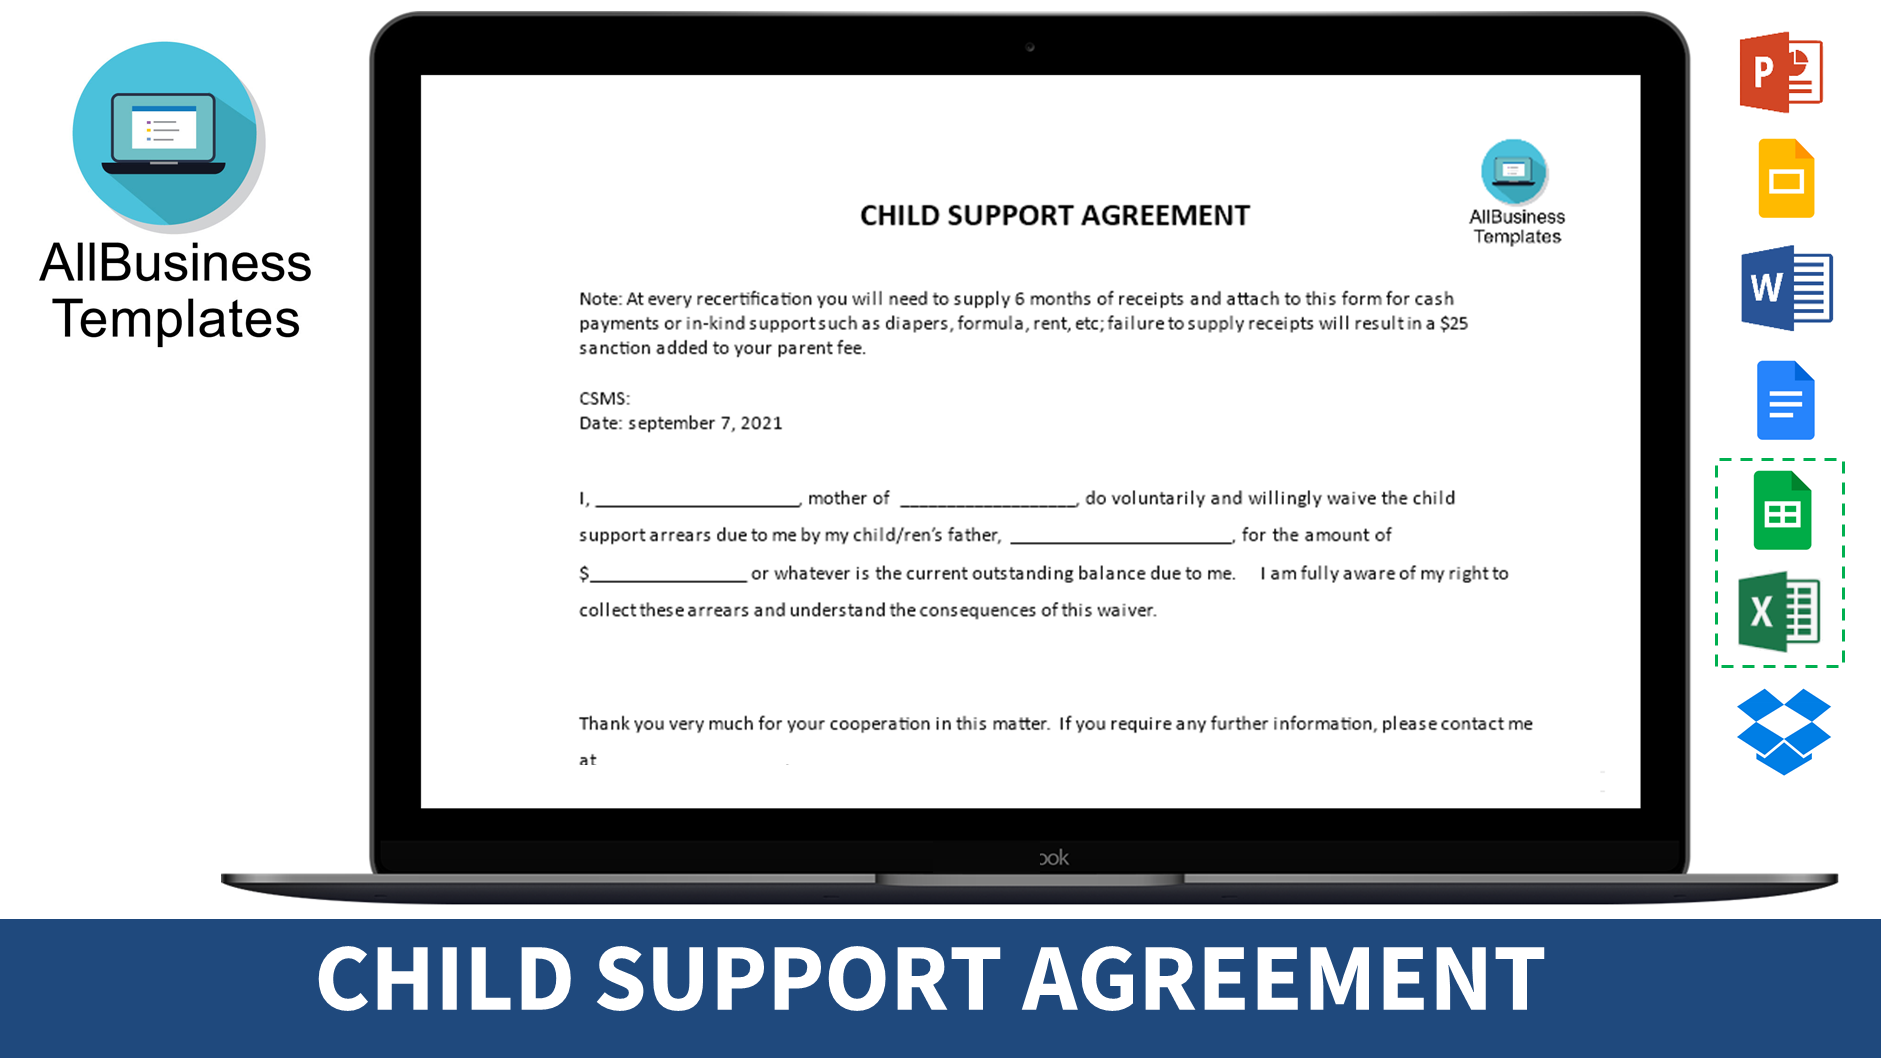 Child Support Mutual Agreement main image